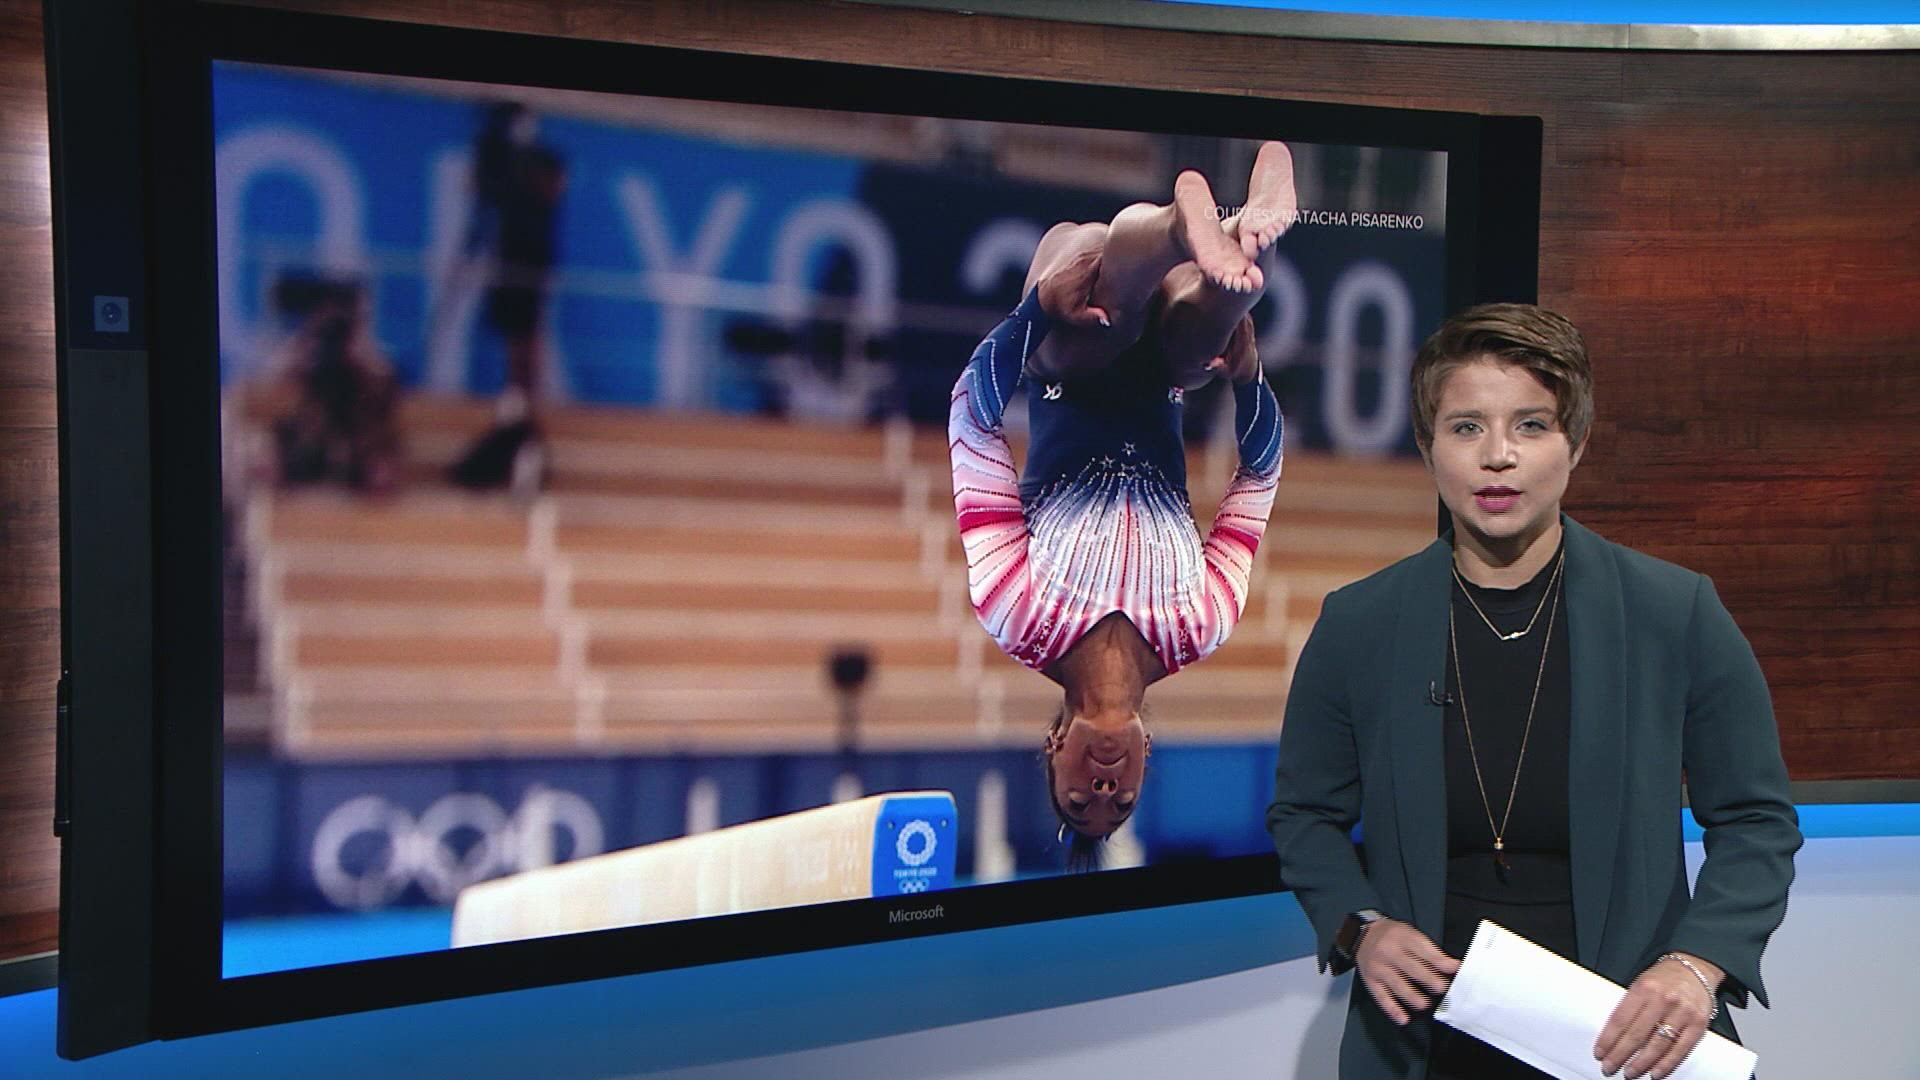 Why are we so hesitant to celebrate small victories? 9NEWS sports reporter Arielle Orsuto says Simone Biles winning bronze on the beam is a big deal.